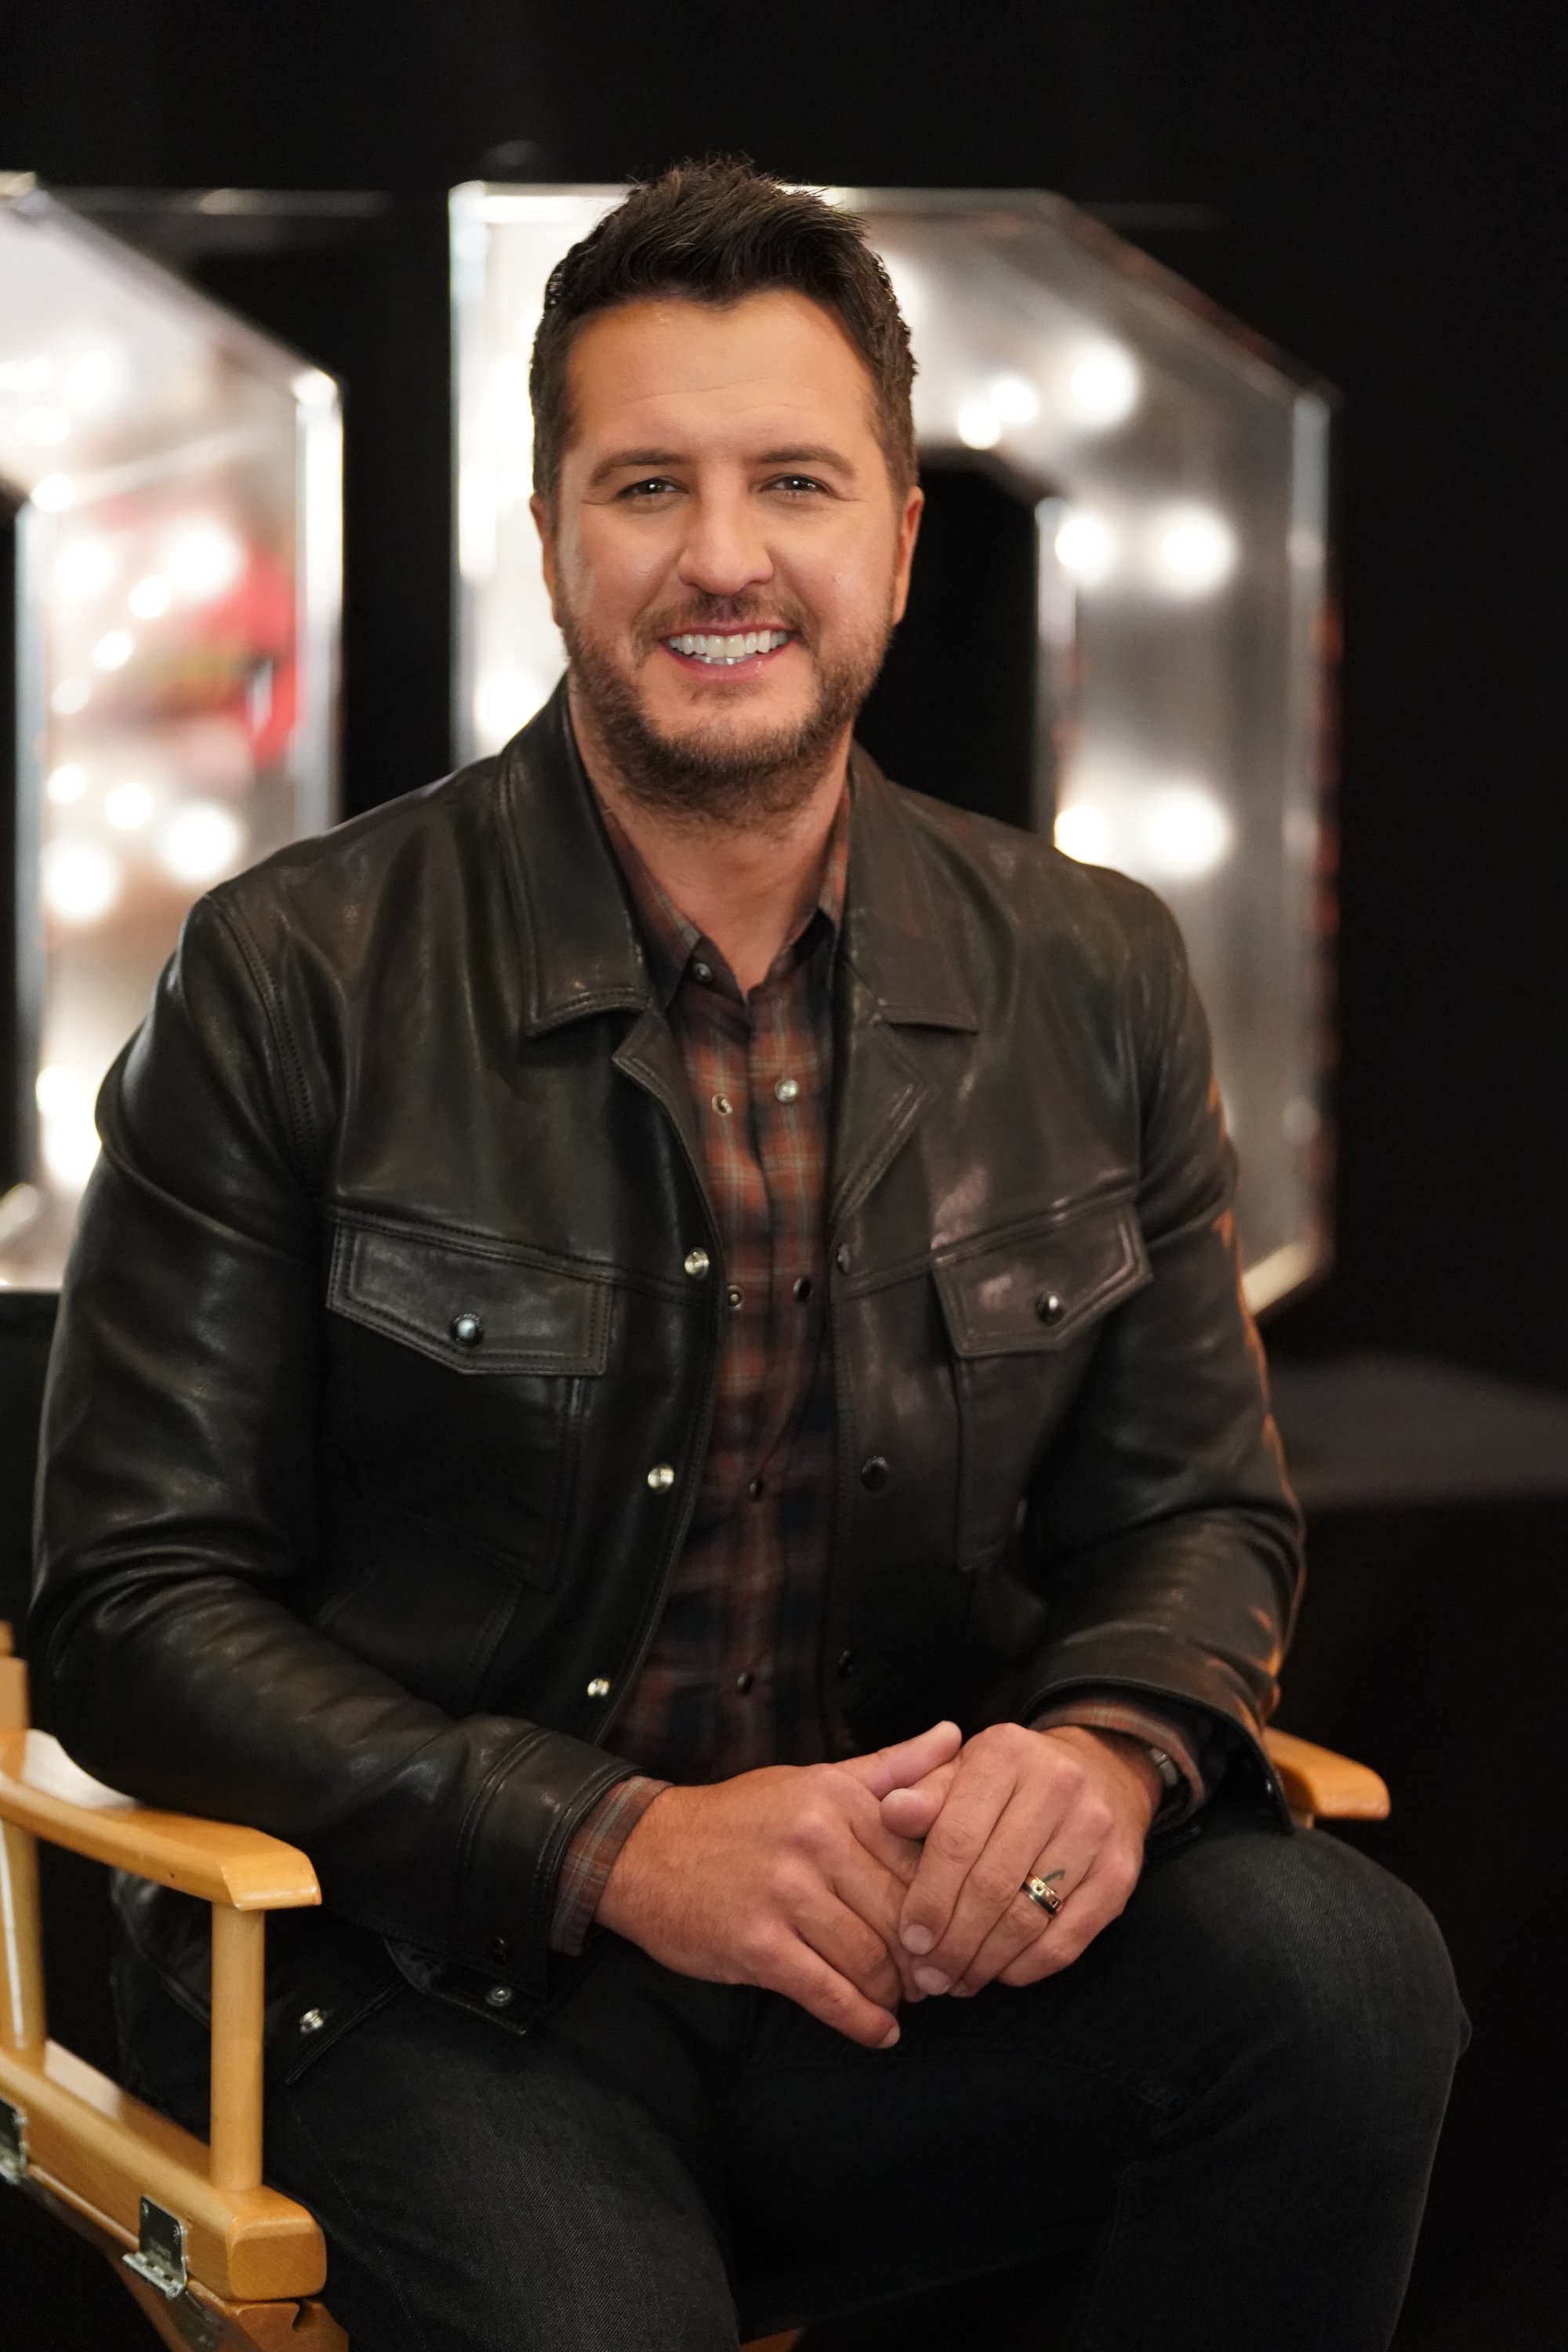 Country singer Luke Bryan during Season 4 of ABC's singing competition "American Idol" ┃ Source: Getty Images